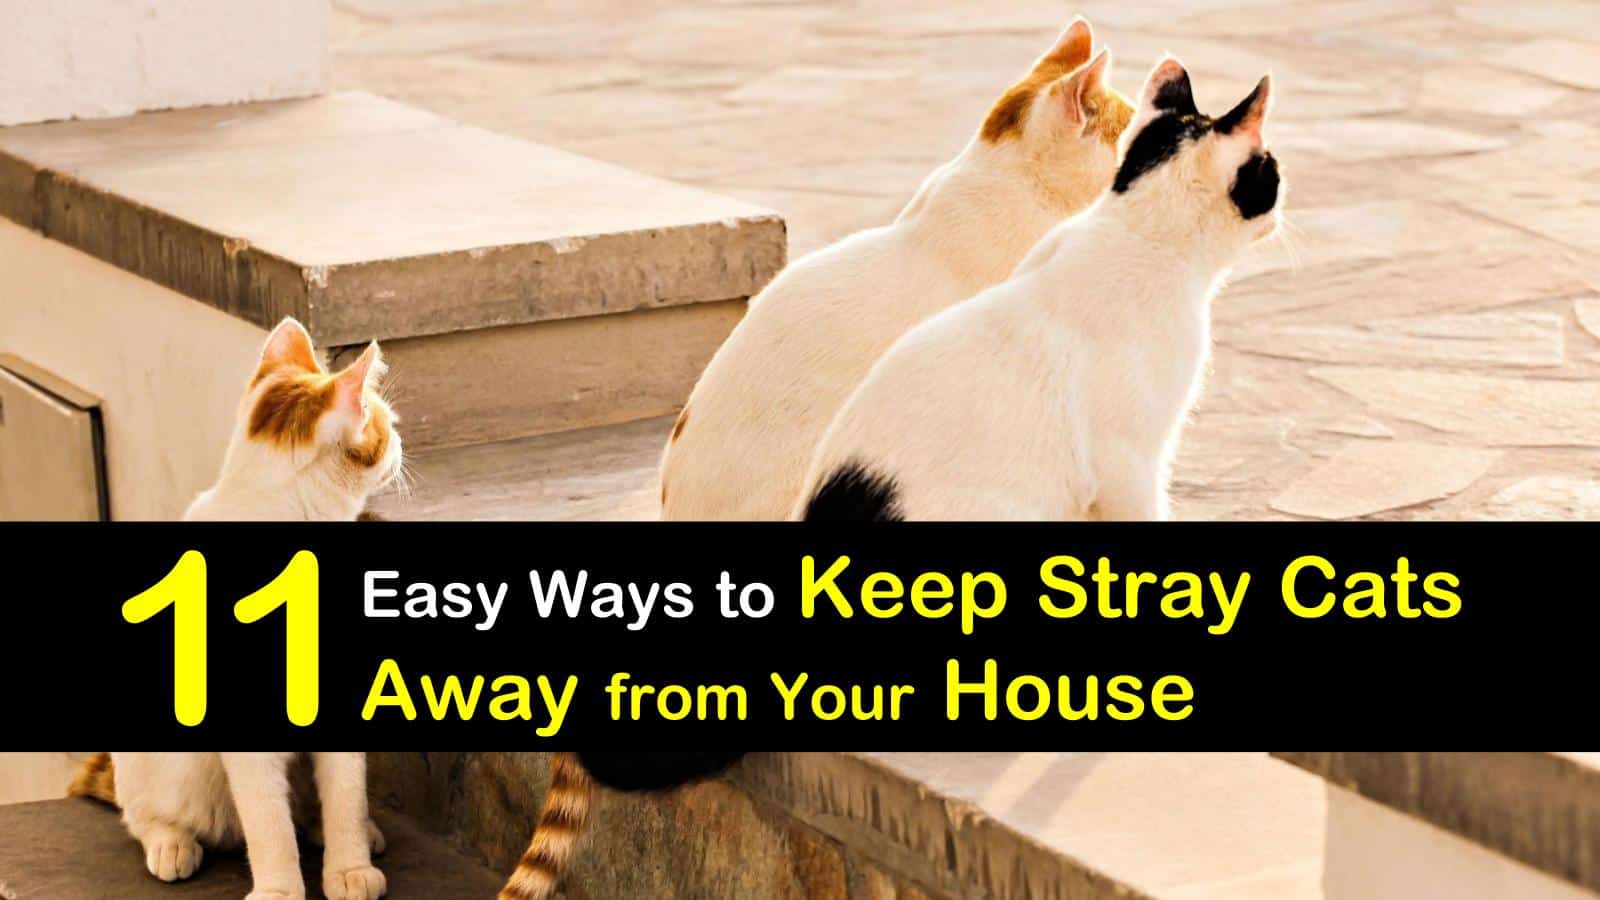 11 Simple Ways To Keep Stray Cats Away From The House,Asparagus Season California